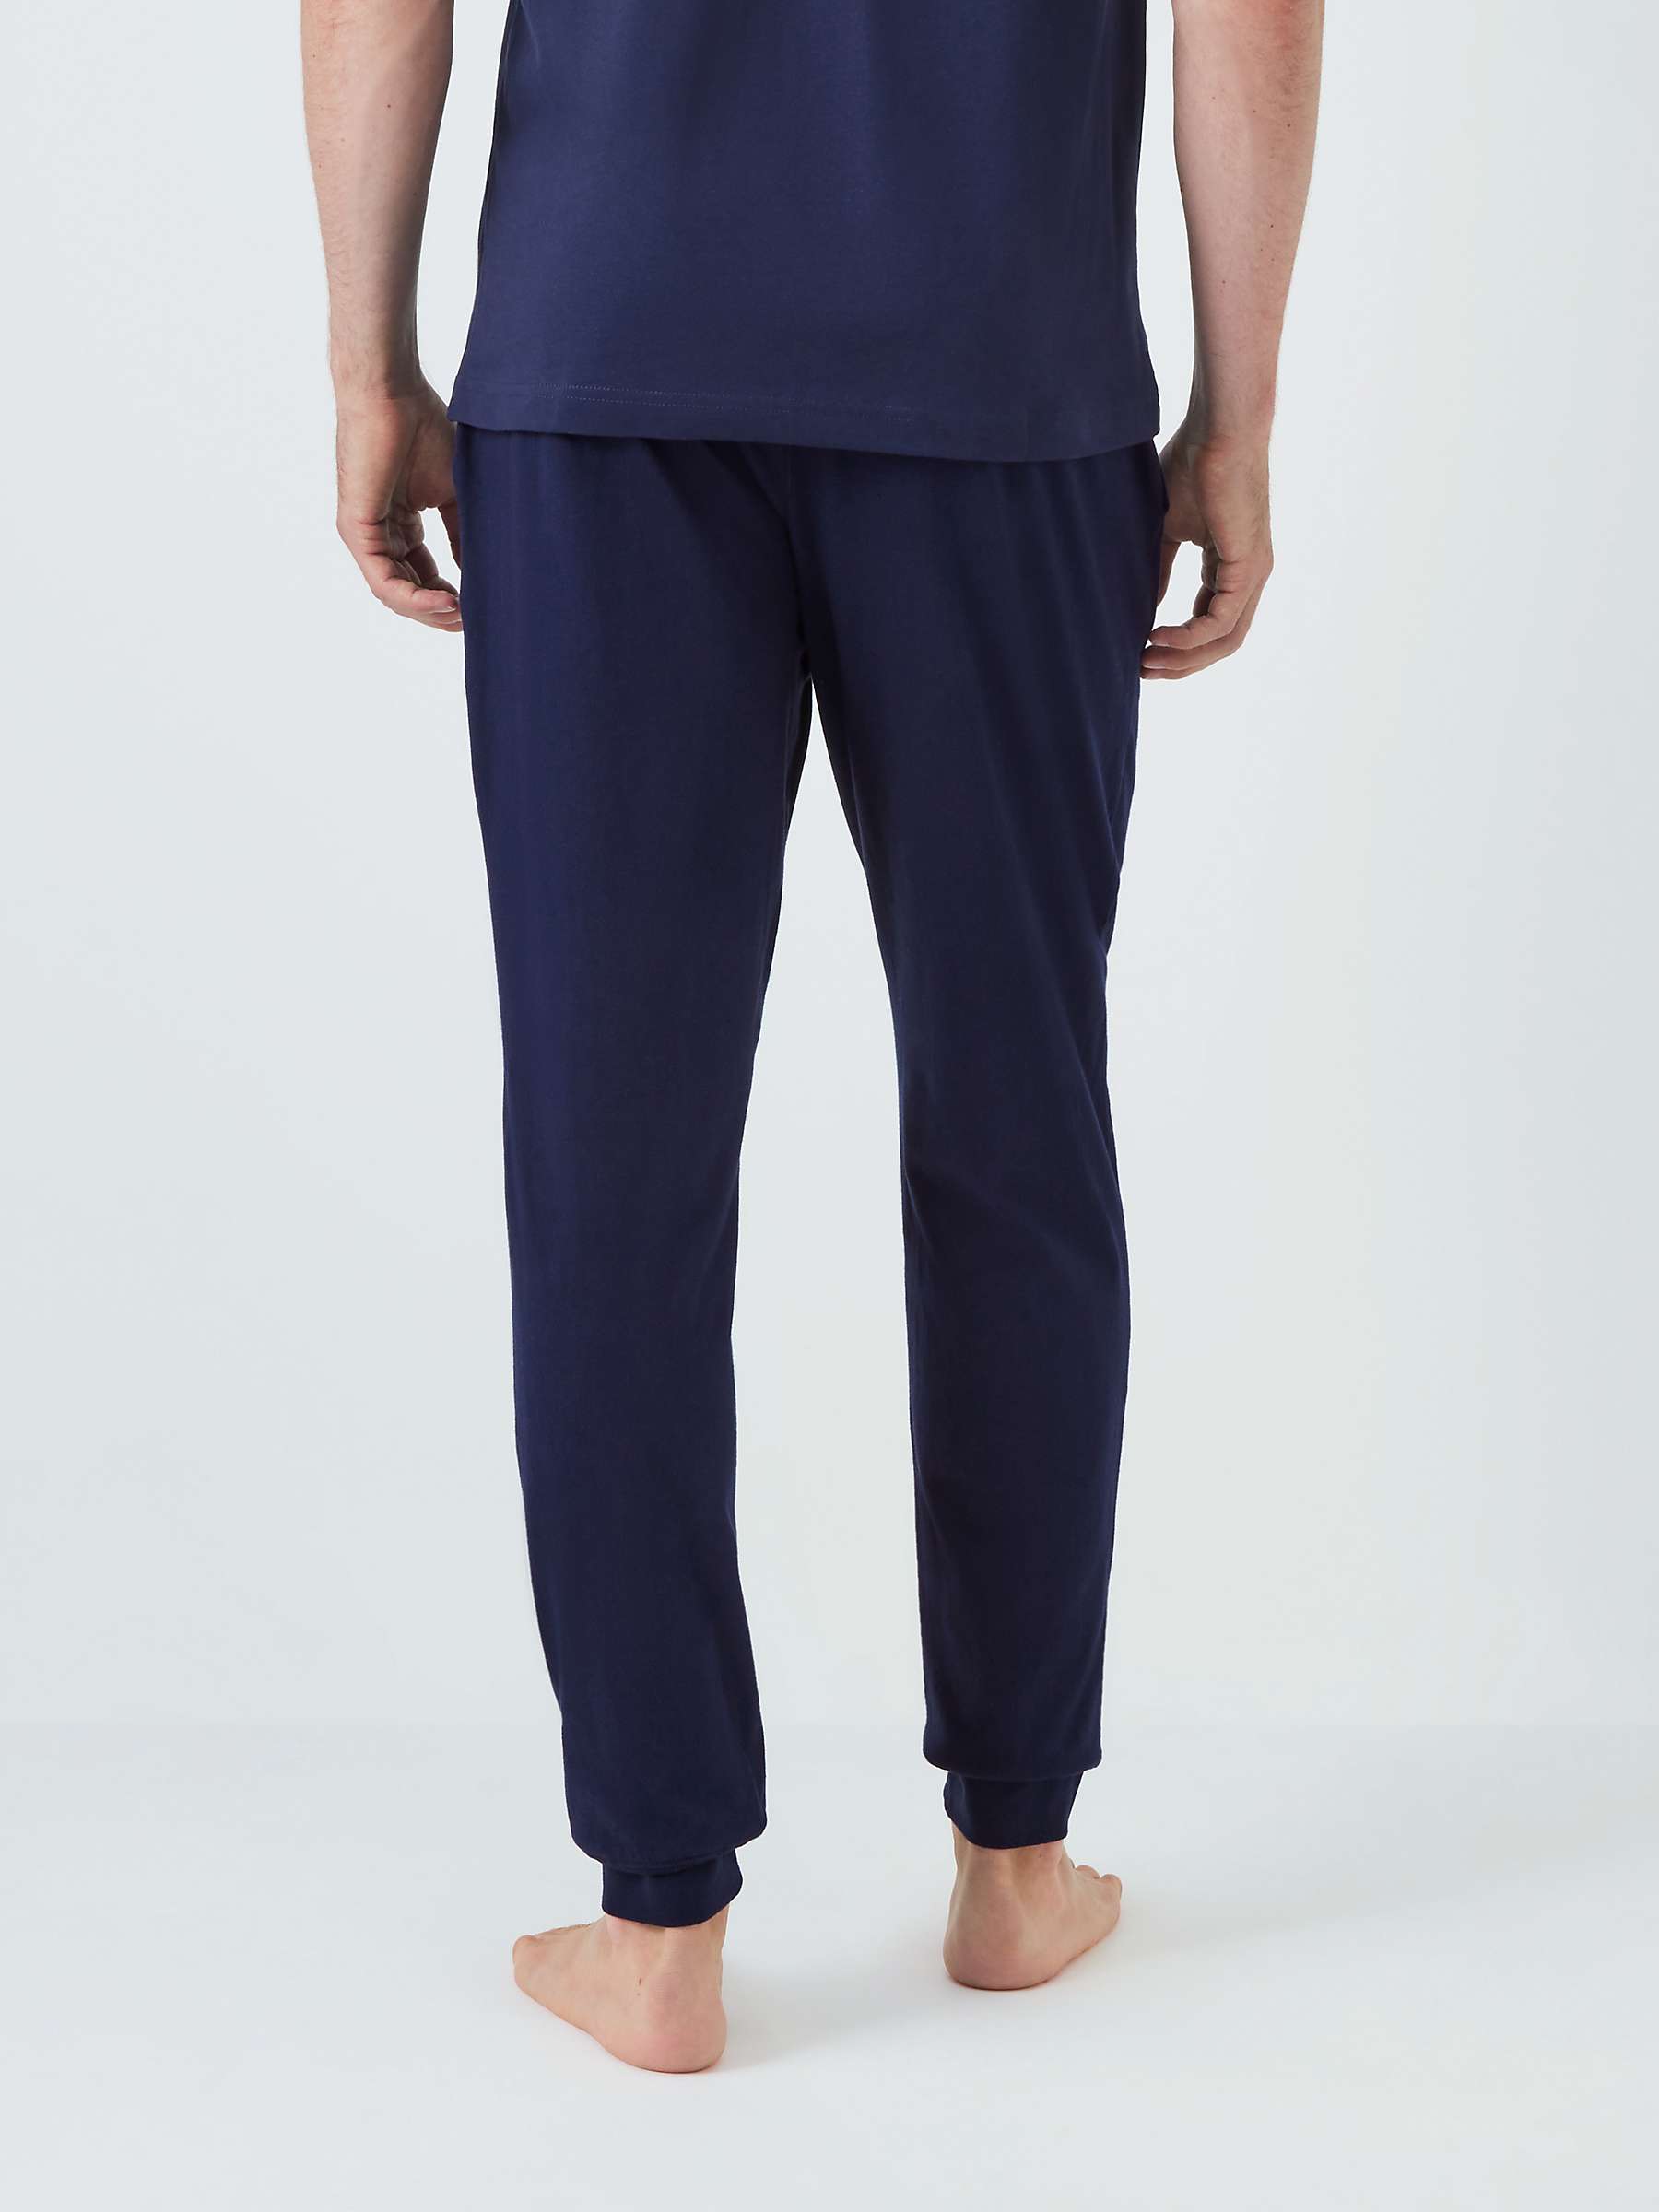 Buy John Lewis ANYDAY Cotton Jersey Joggers, Pack of 2, Navy/Grey Online at johnlewis.com